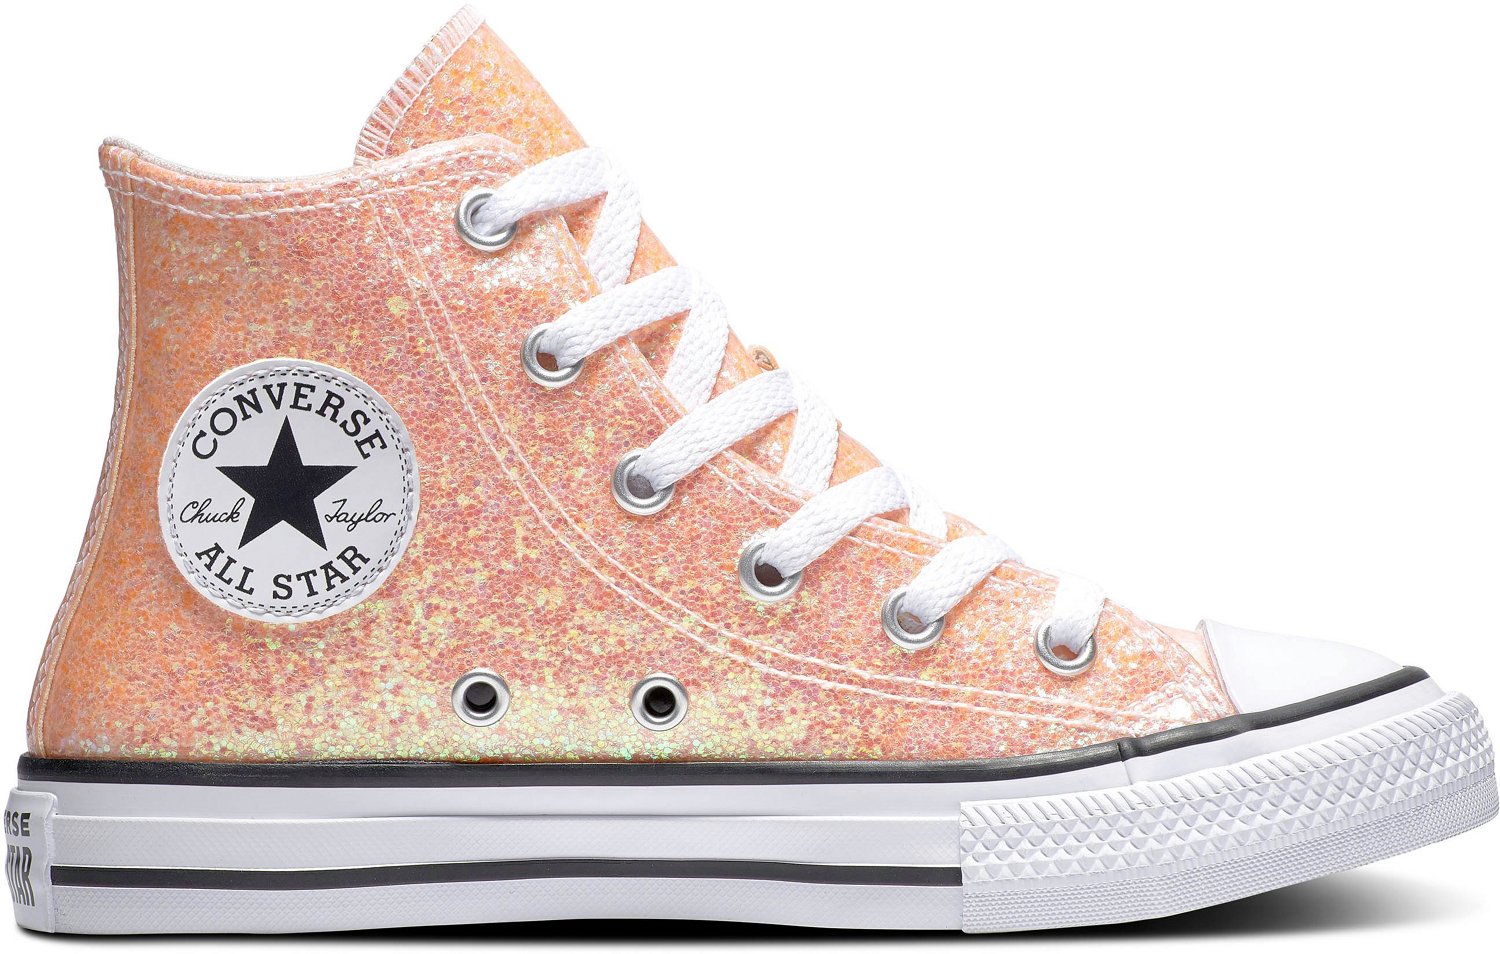 Converse Shoes \u0026 Sneakers | Academy